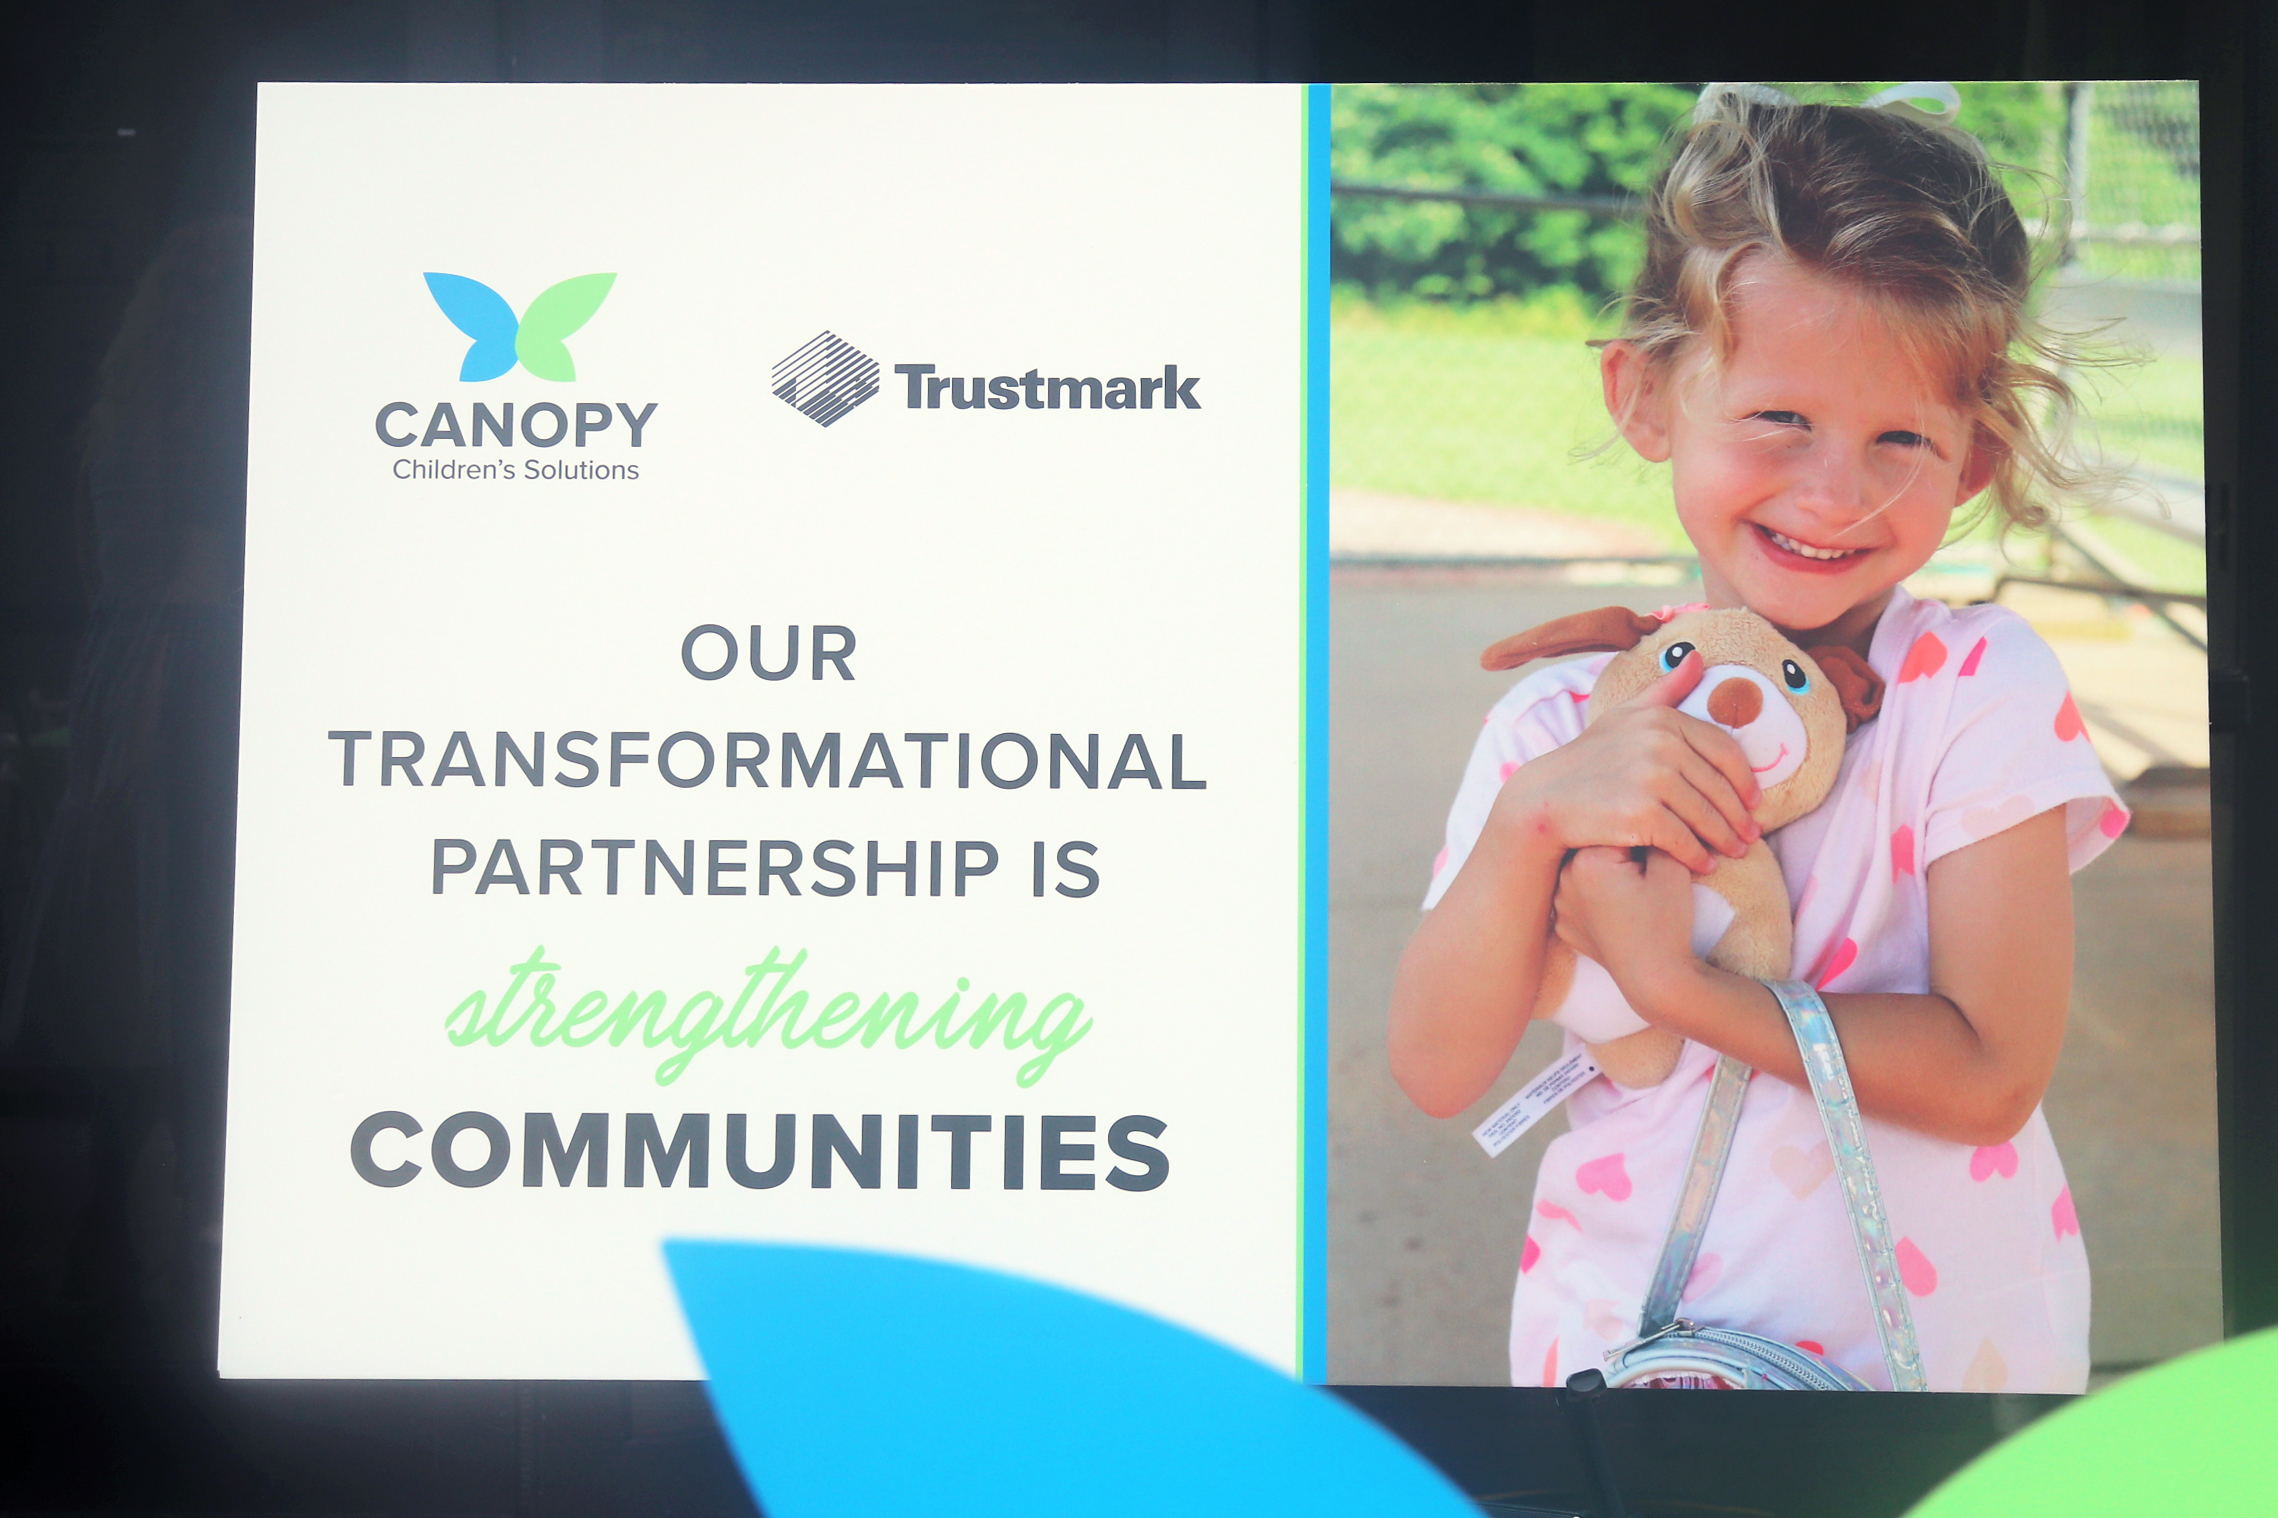 Canopy Children’s Solutions and Trustmark Partner to Strengthen Communities Through the Children’s Promise Act